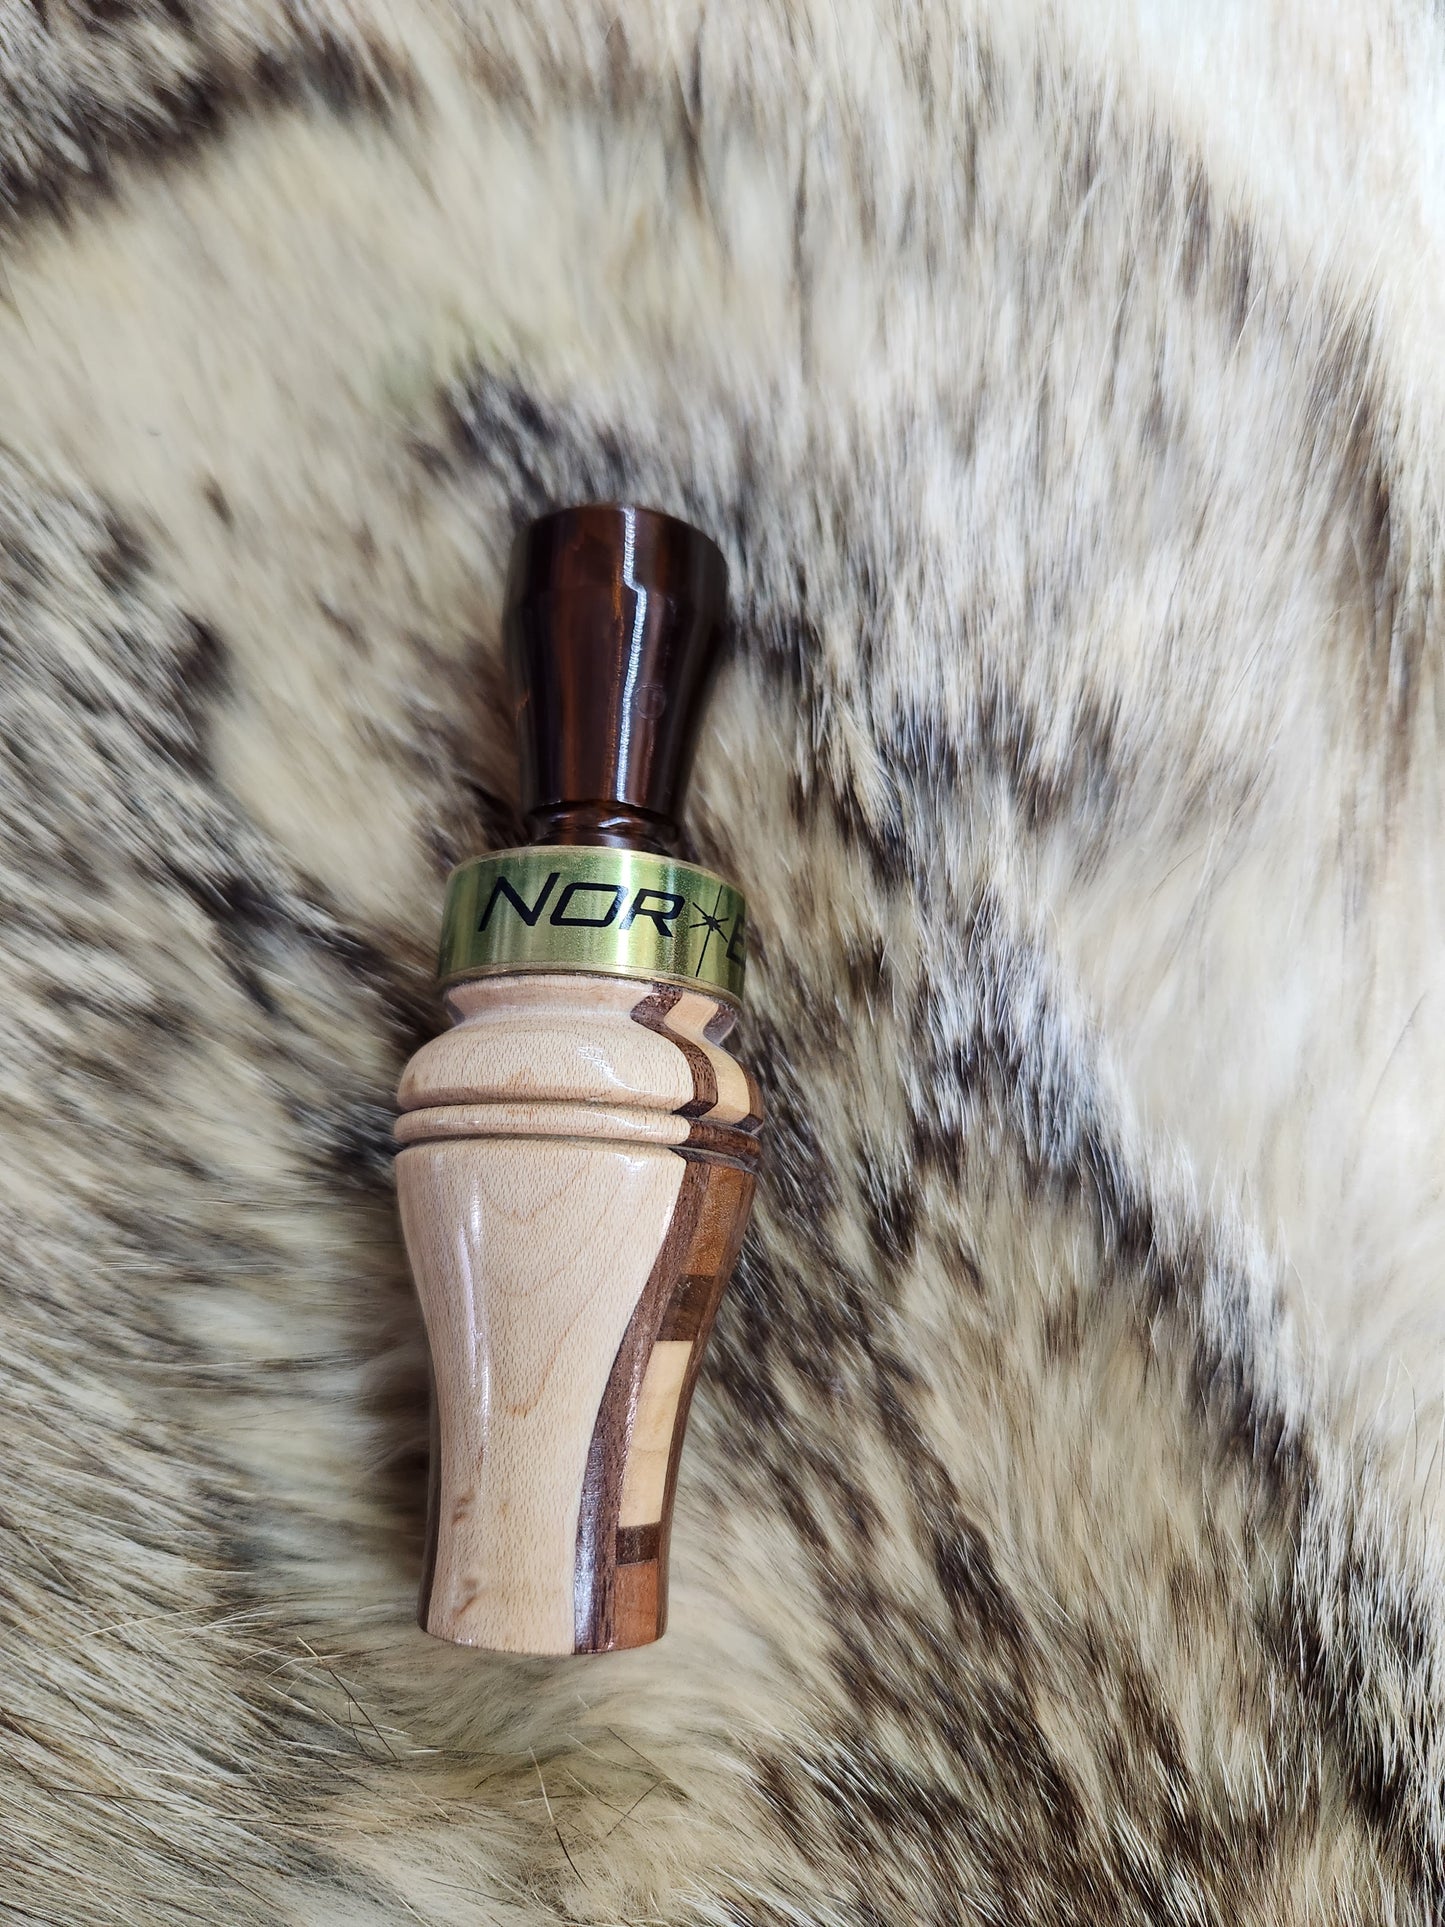 custom checker board style double reed duck call